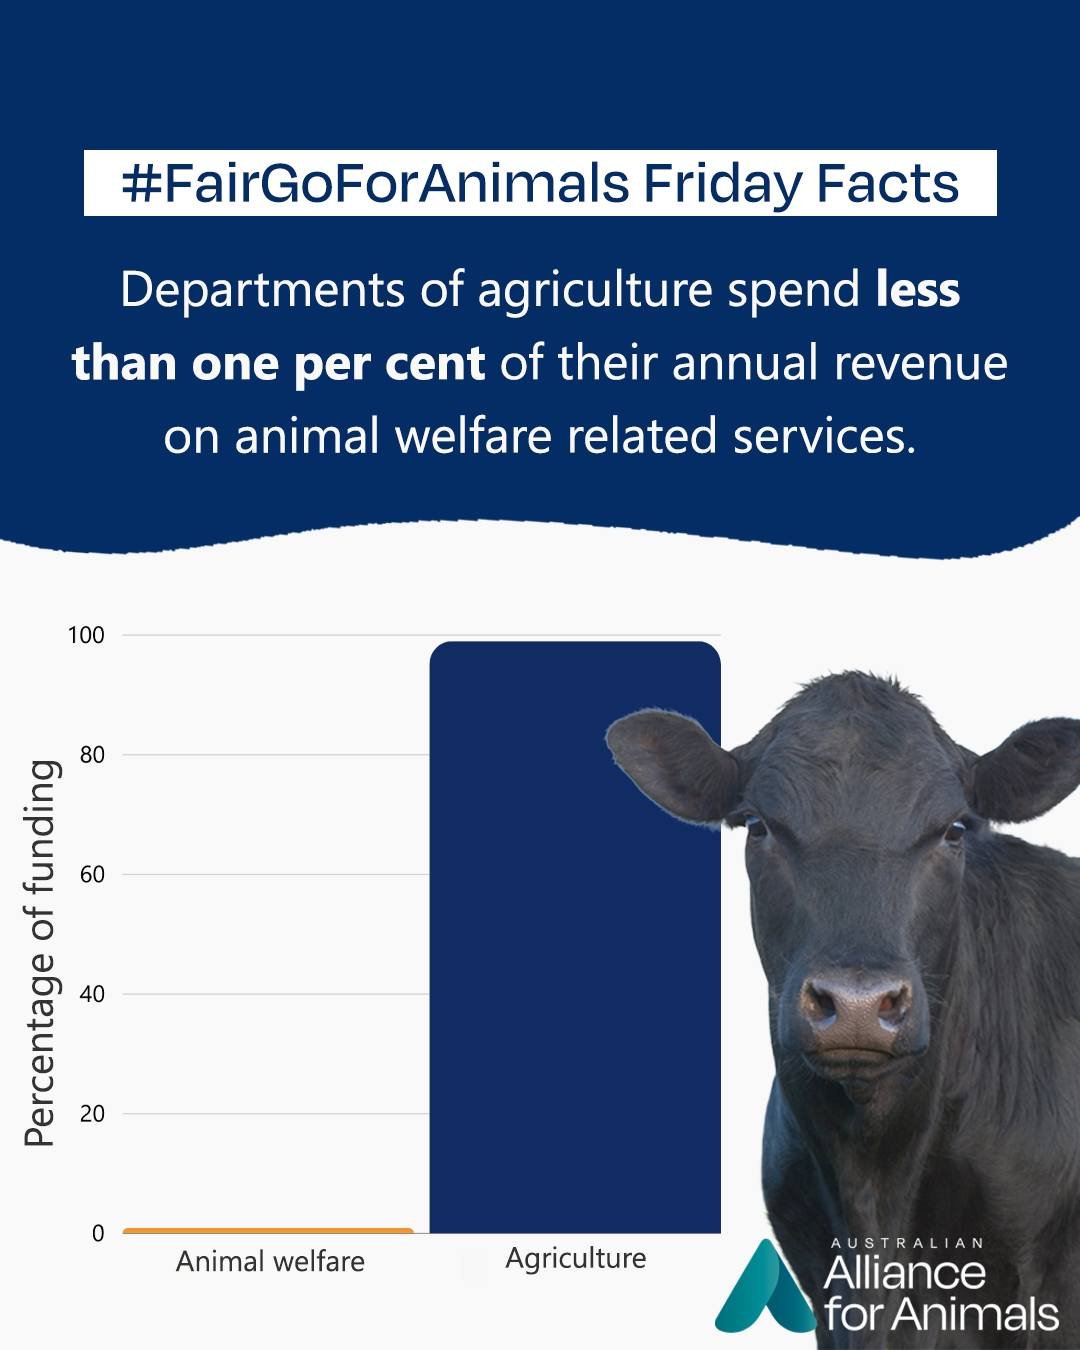 Beyond the fact that animal welfare services receive less than one per cent of funding, it's even more disheartening to discover that such services are not specifically identified in departmental operational expenditure records. Where there is mentio